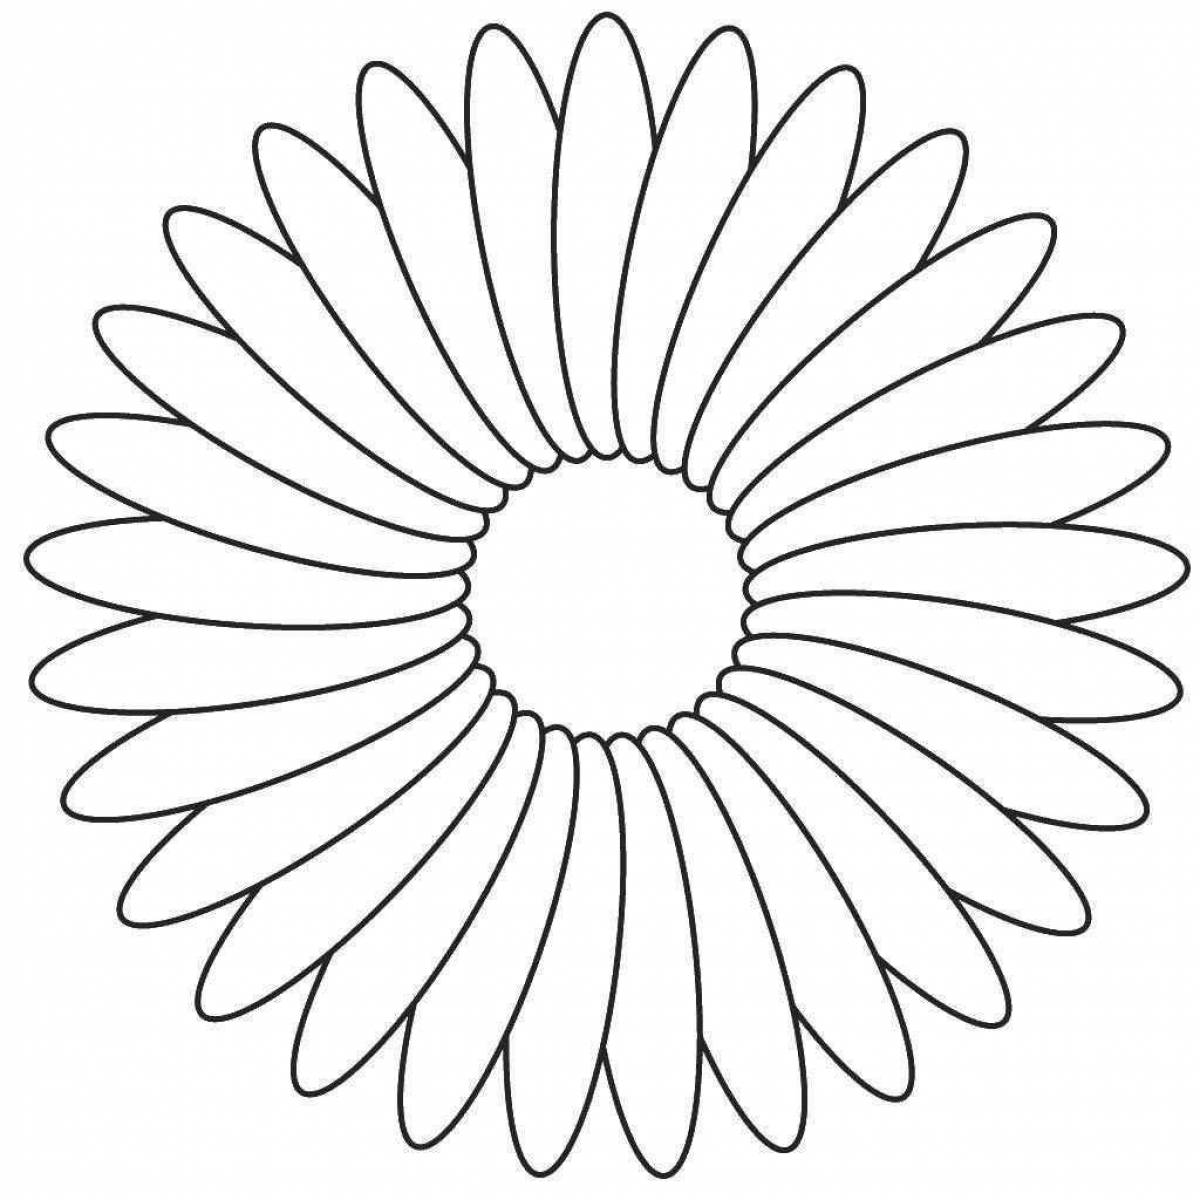 Coloring flower pattern